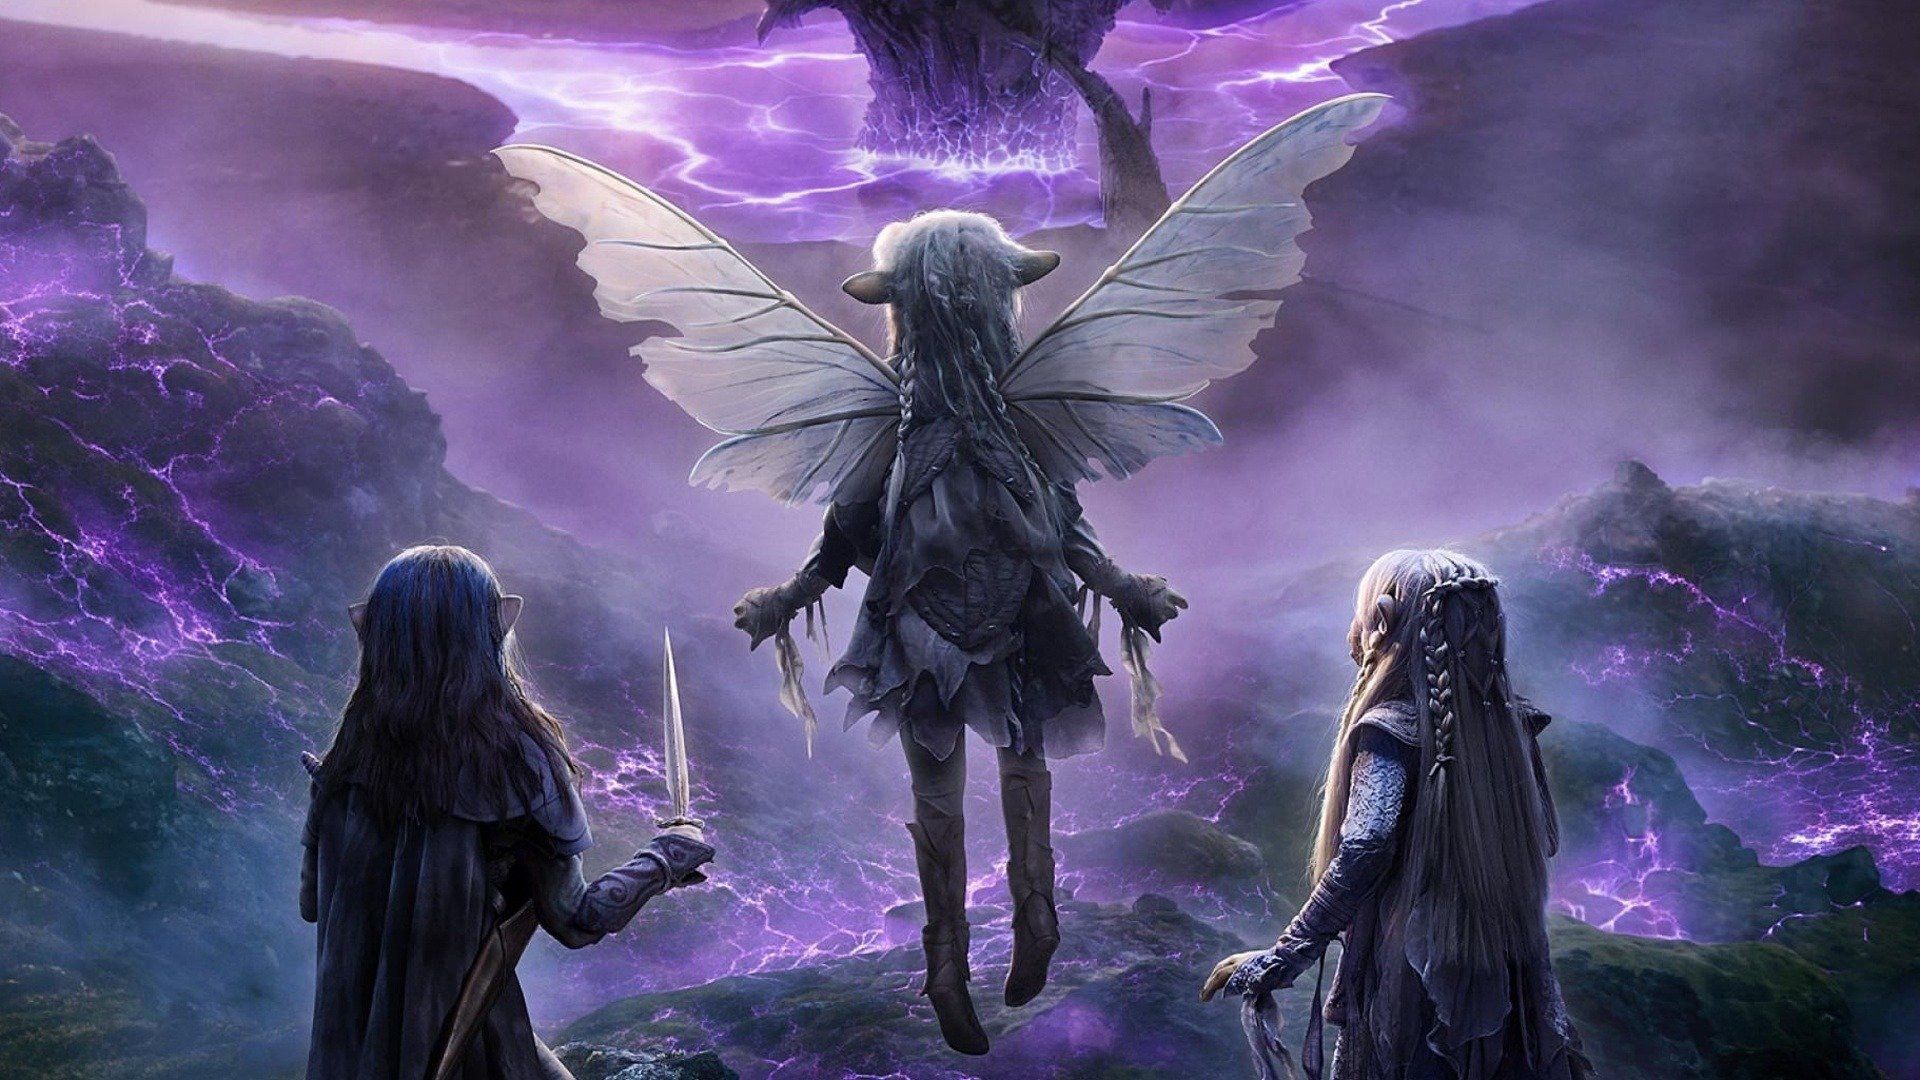 The Dark Crystal: Age of Resistance Backdrop